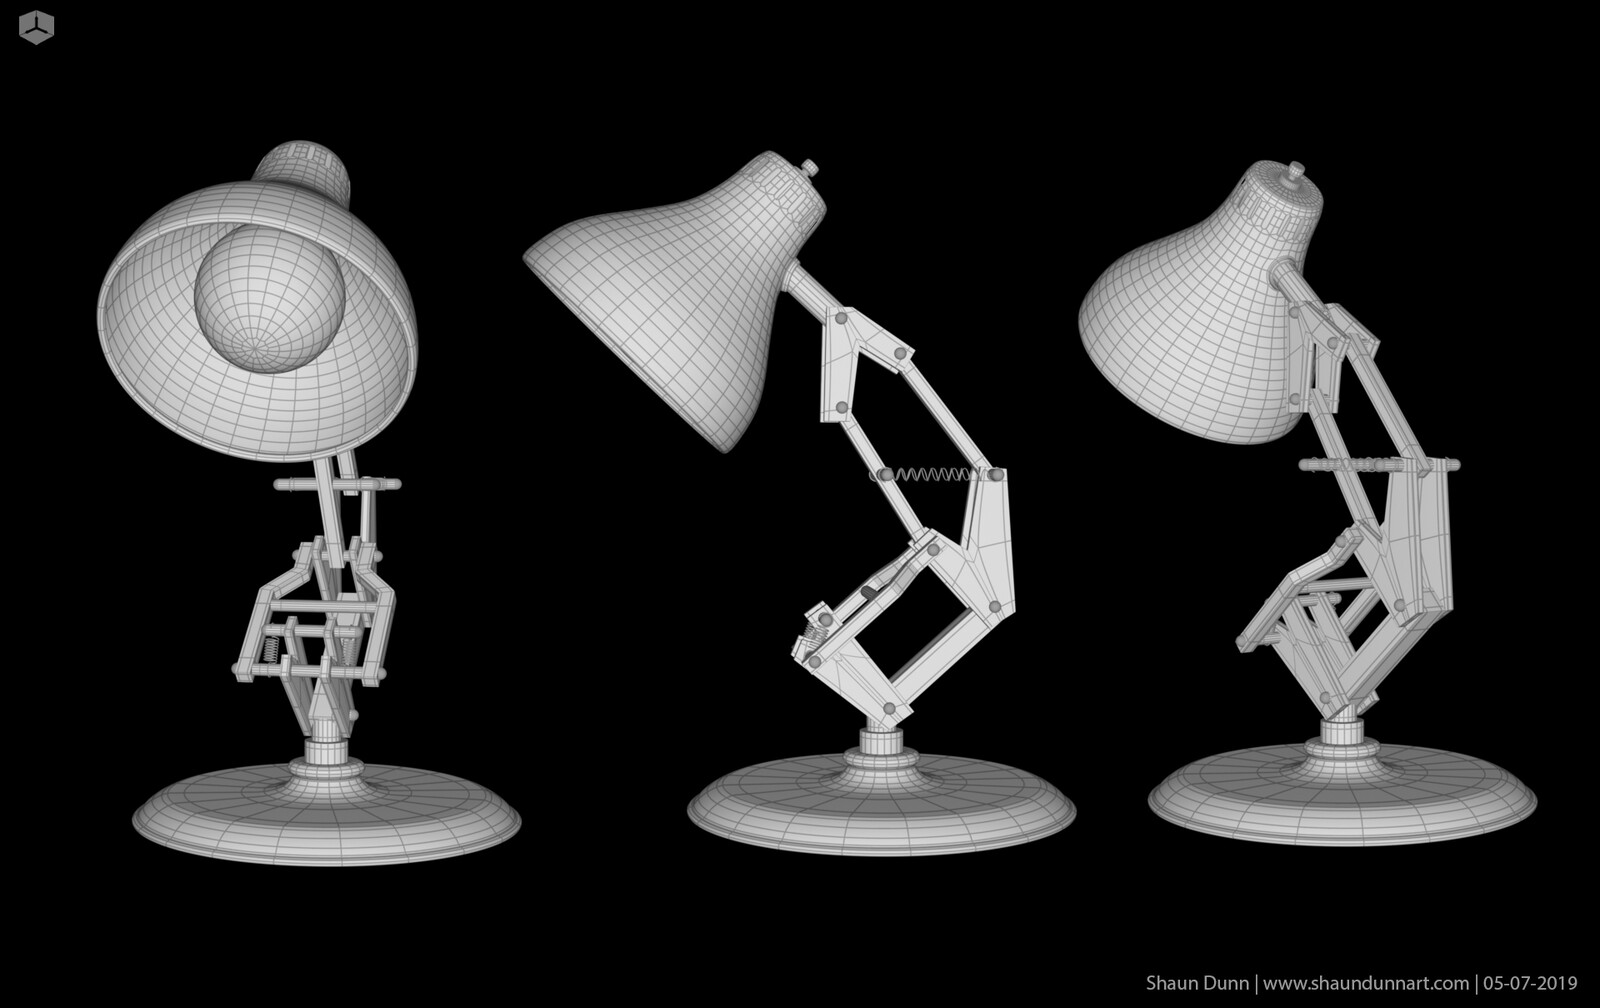 The Luxo Jr  3D model is another prop I created to help support my story.